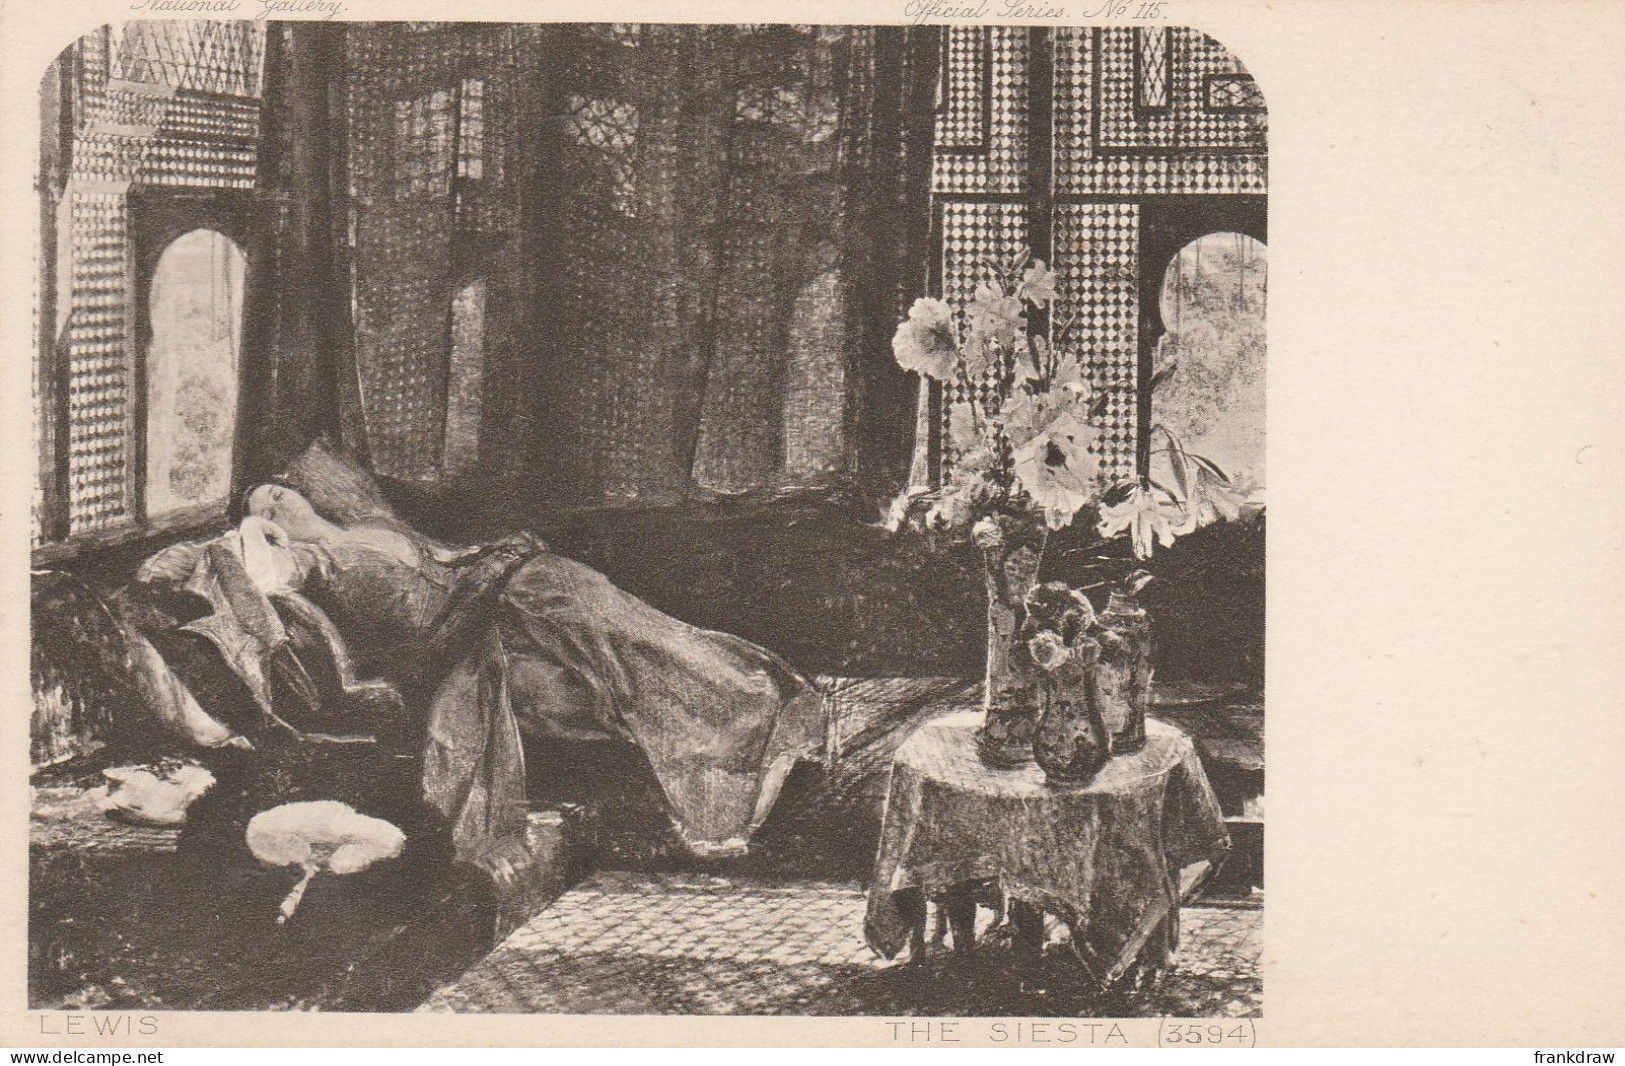 Postcard - Art - Rembrandt - Photogravure - Lewis - The Siesta - Card No.3594 - VERY GOOD - Unclassified